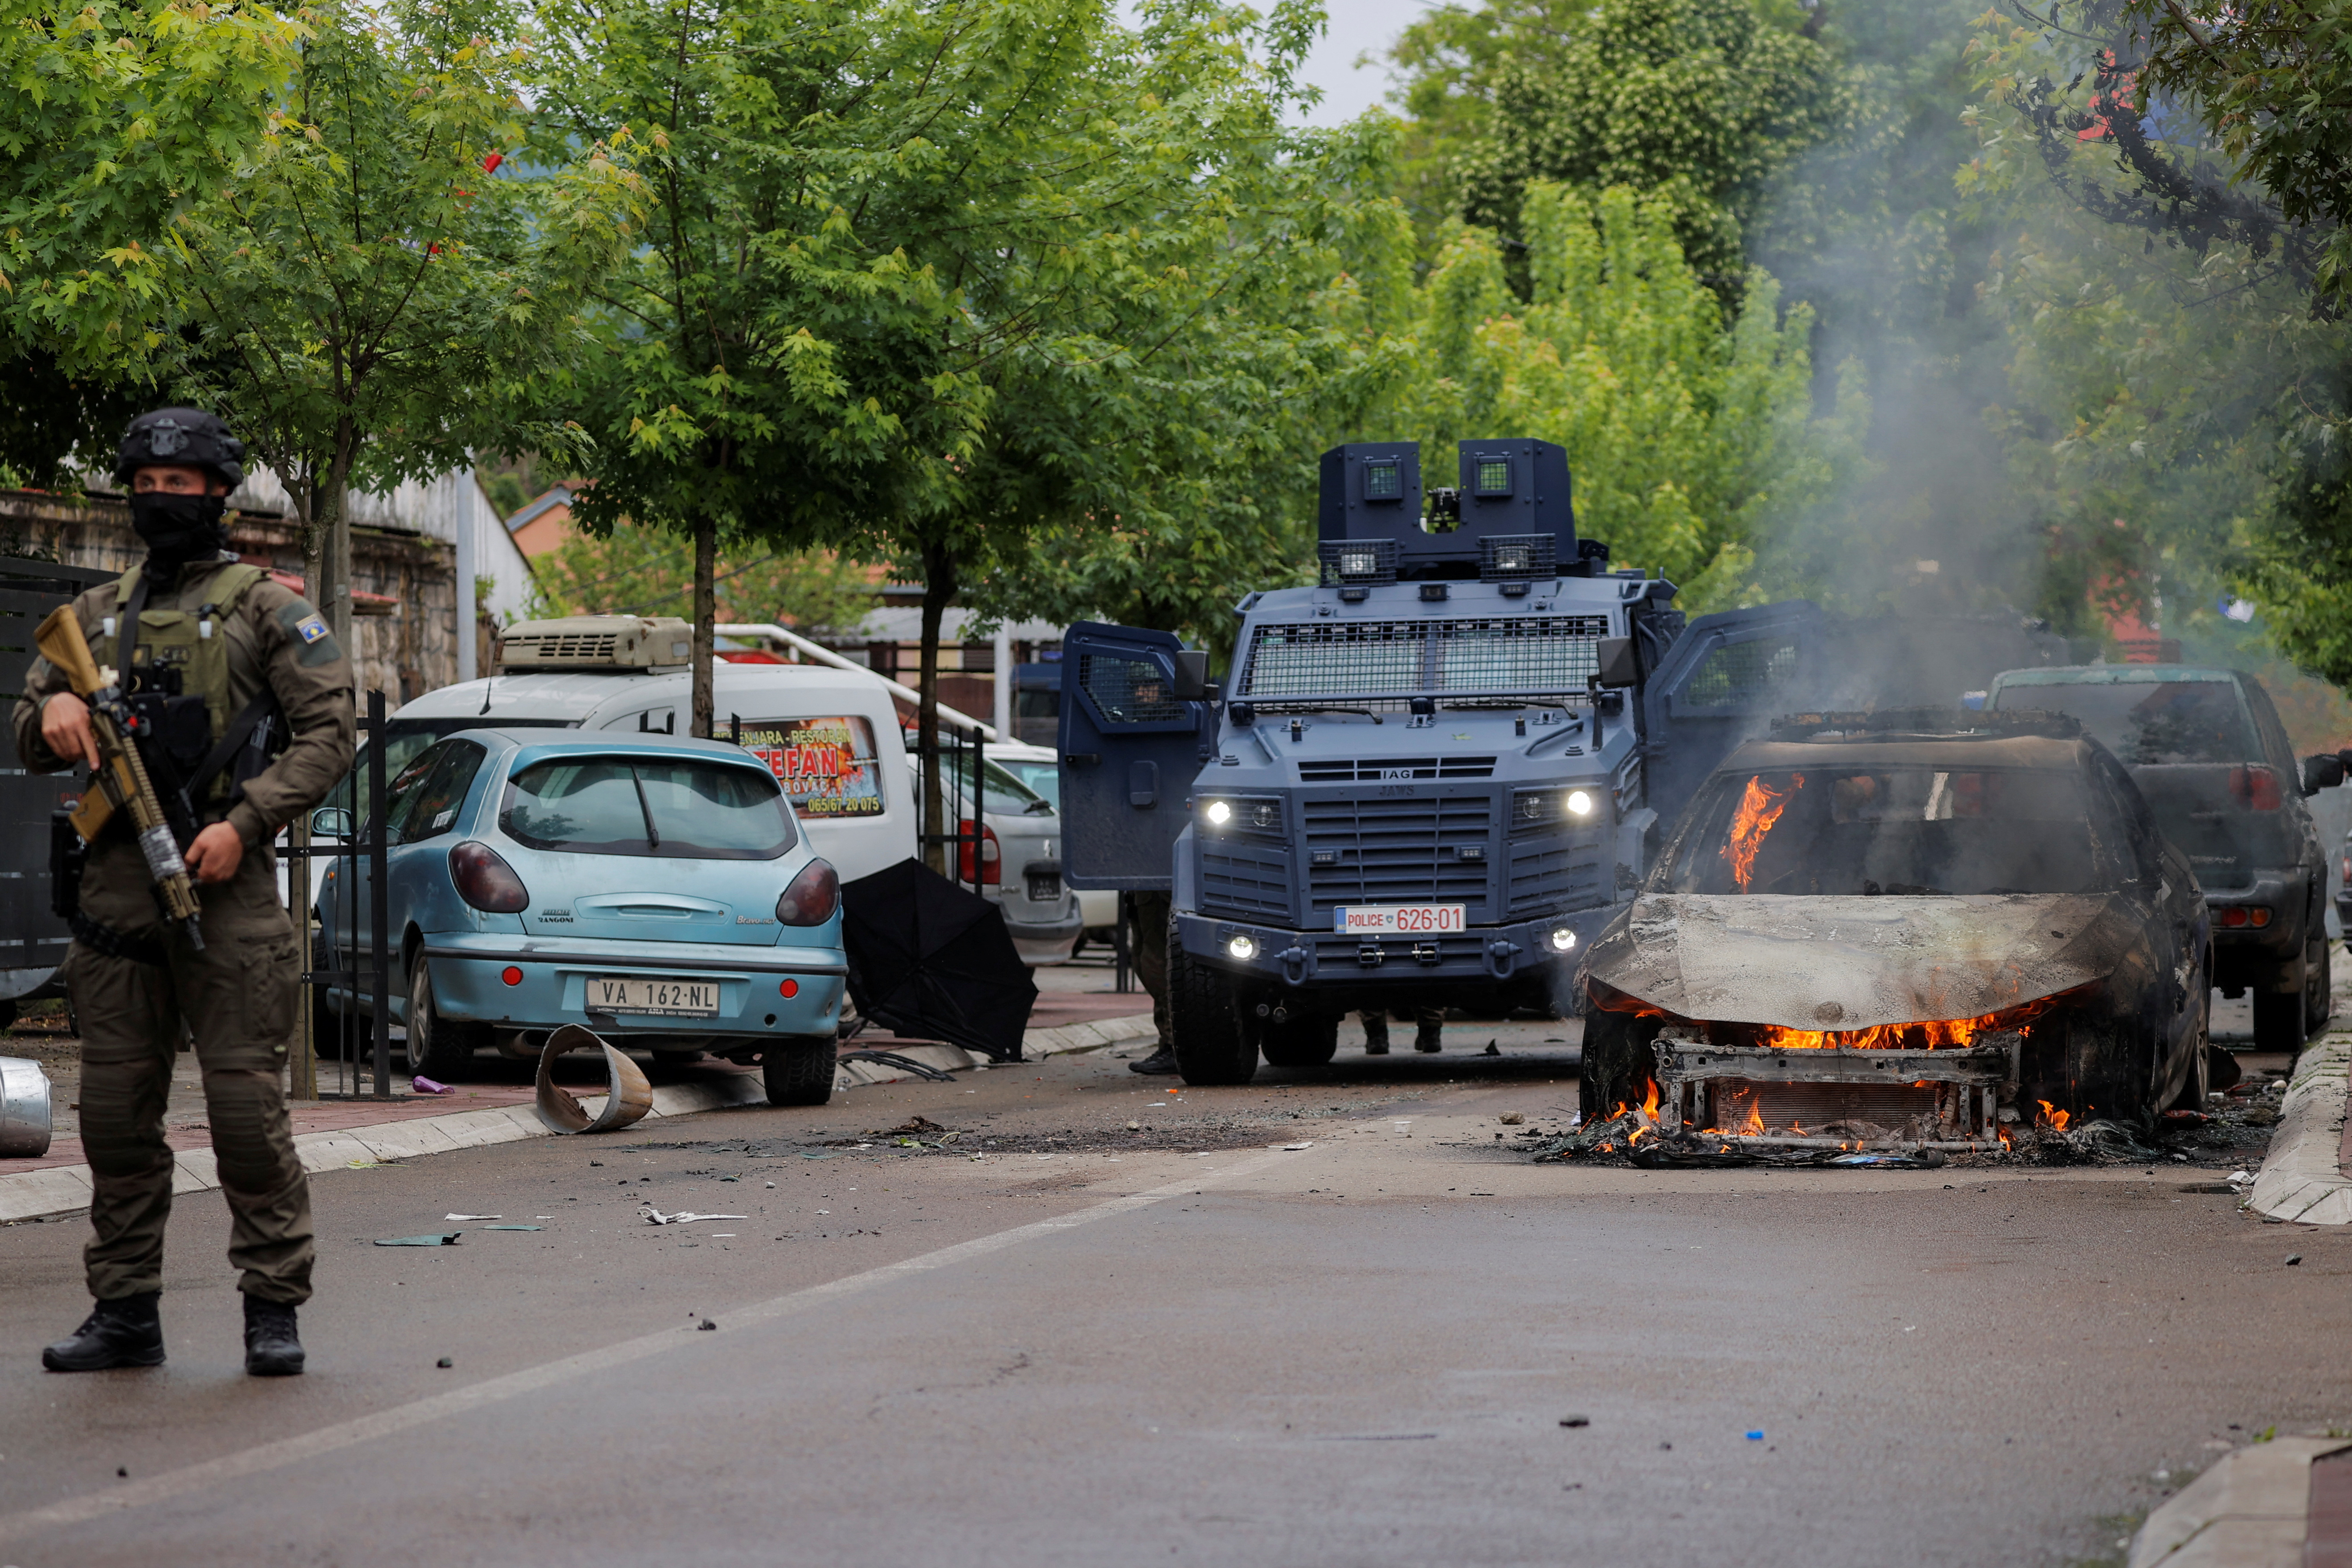 Clashes between Kosovo police and ethnic Serb protesters in the town of Zvecan